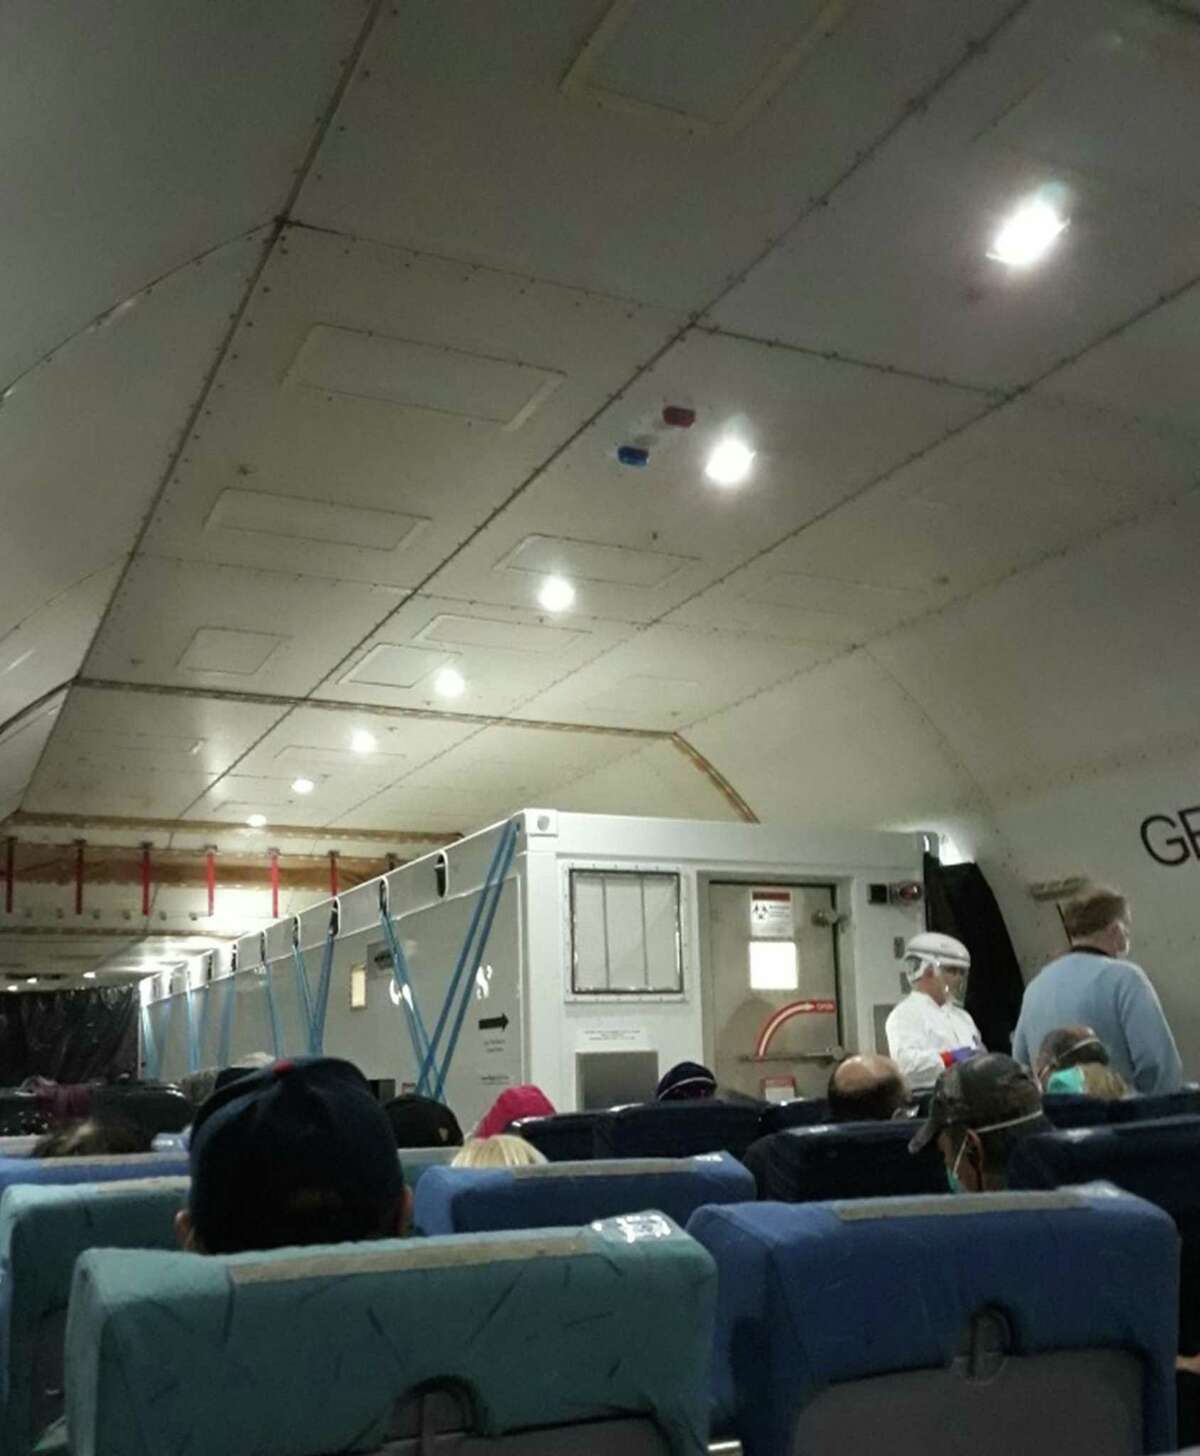 Americans evacuated from the Diamond Princess cruise ship in Japan were flown back on private cargo charter planes featuring isolation chambers for any passengers infected with the coronavirus and those exhibiting symptoms during their trip back to the United States.